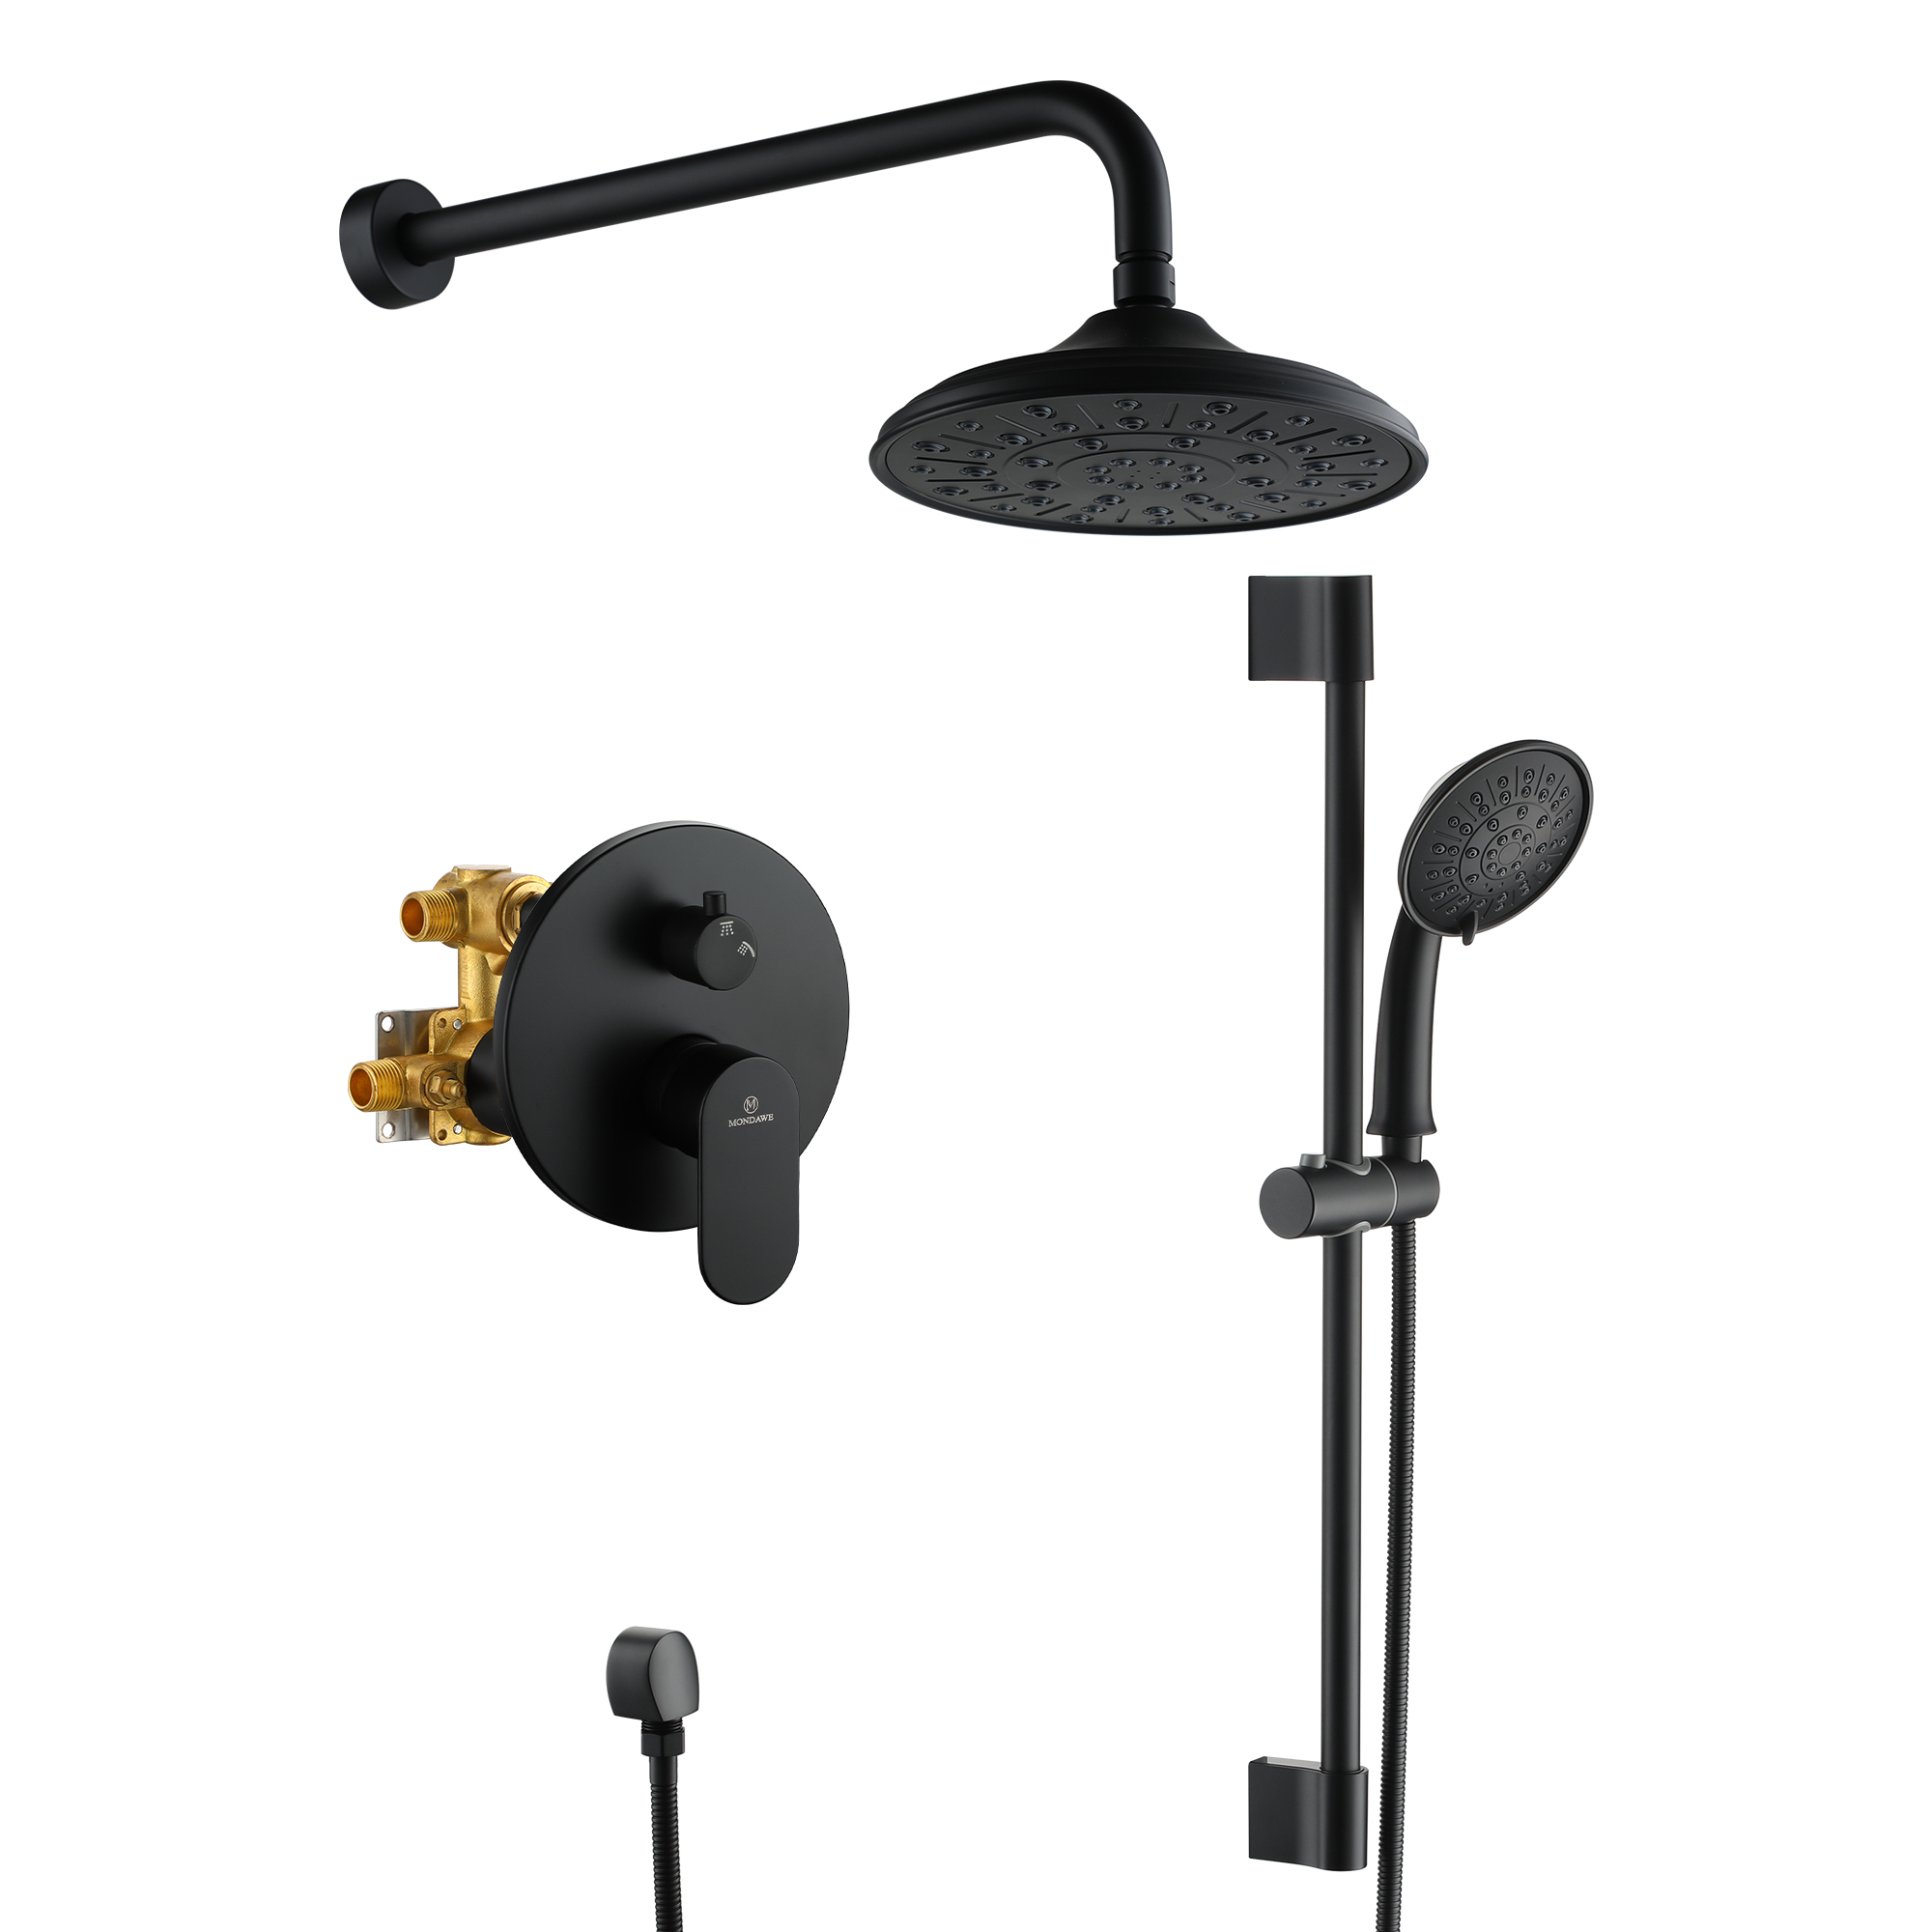 3815MBMondawe Retro Series 2-Spray Patterns with 1.8 GPM 8 in. Rain Wall Mount Dual Shower Heads with Handheld and Spout in Brushed Nickel/ Black/ Bronze/Brushed Gold-Mondawe